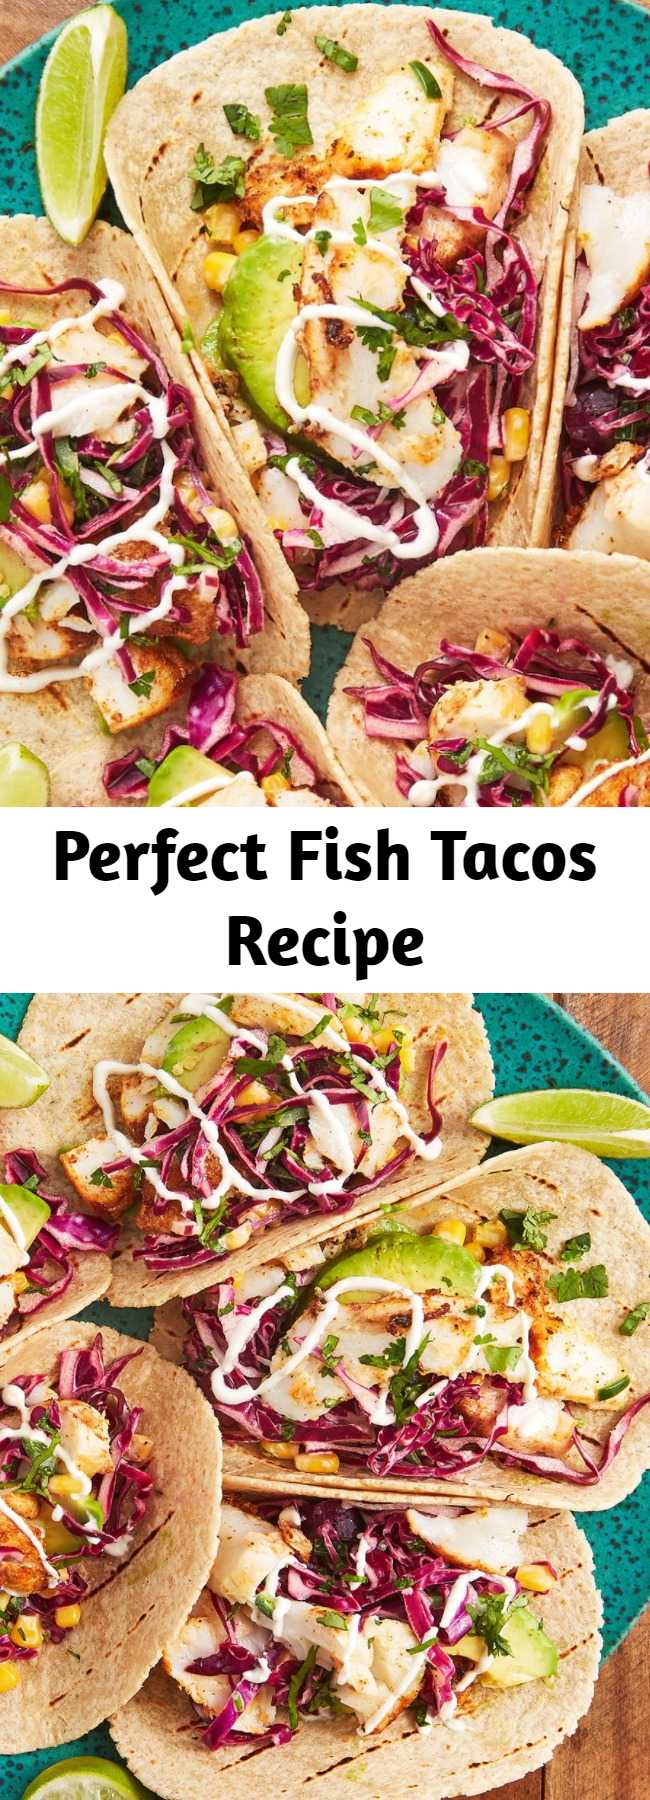 Perfect Fish Tacos Recipe - Love fish tacos? Well, these are the end-all be-all. People can be intimidated by cooking fish for tacos, but don't be! After marinating, the fish just needs to cook in a glug of olive oil for a few minutes per side in a skillet. Let the fish rest a few minutes before using a fork to flake it into pieces.